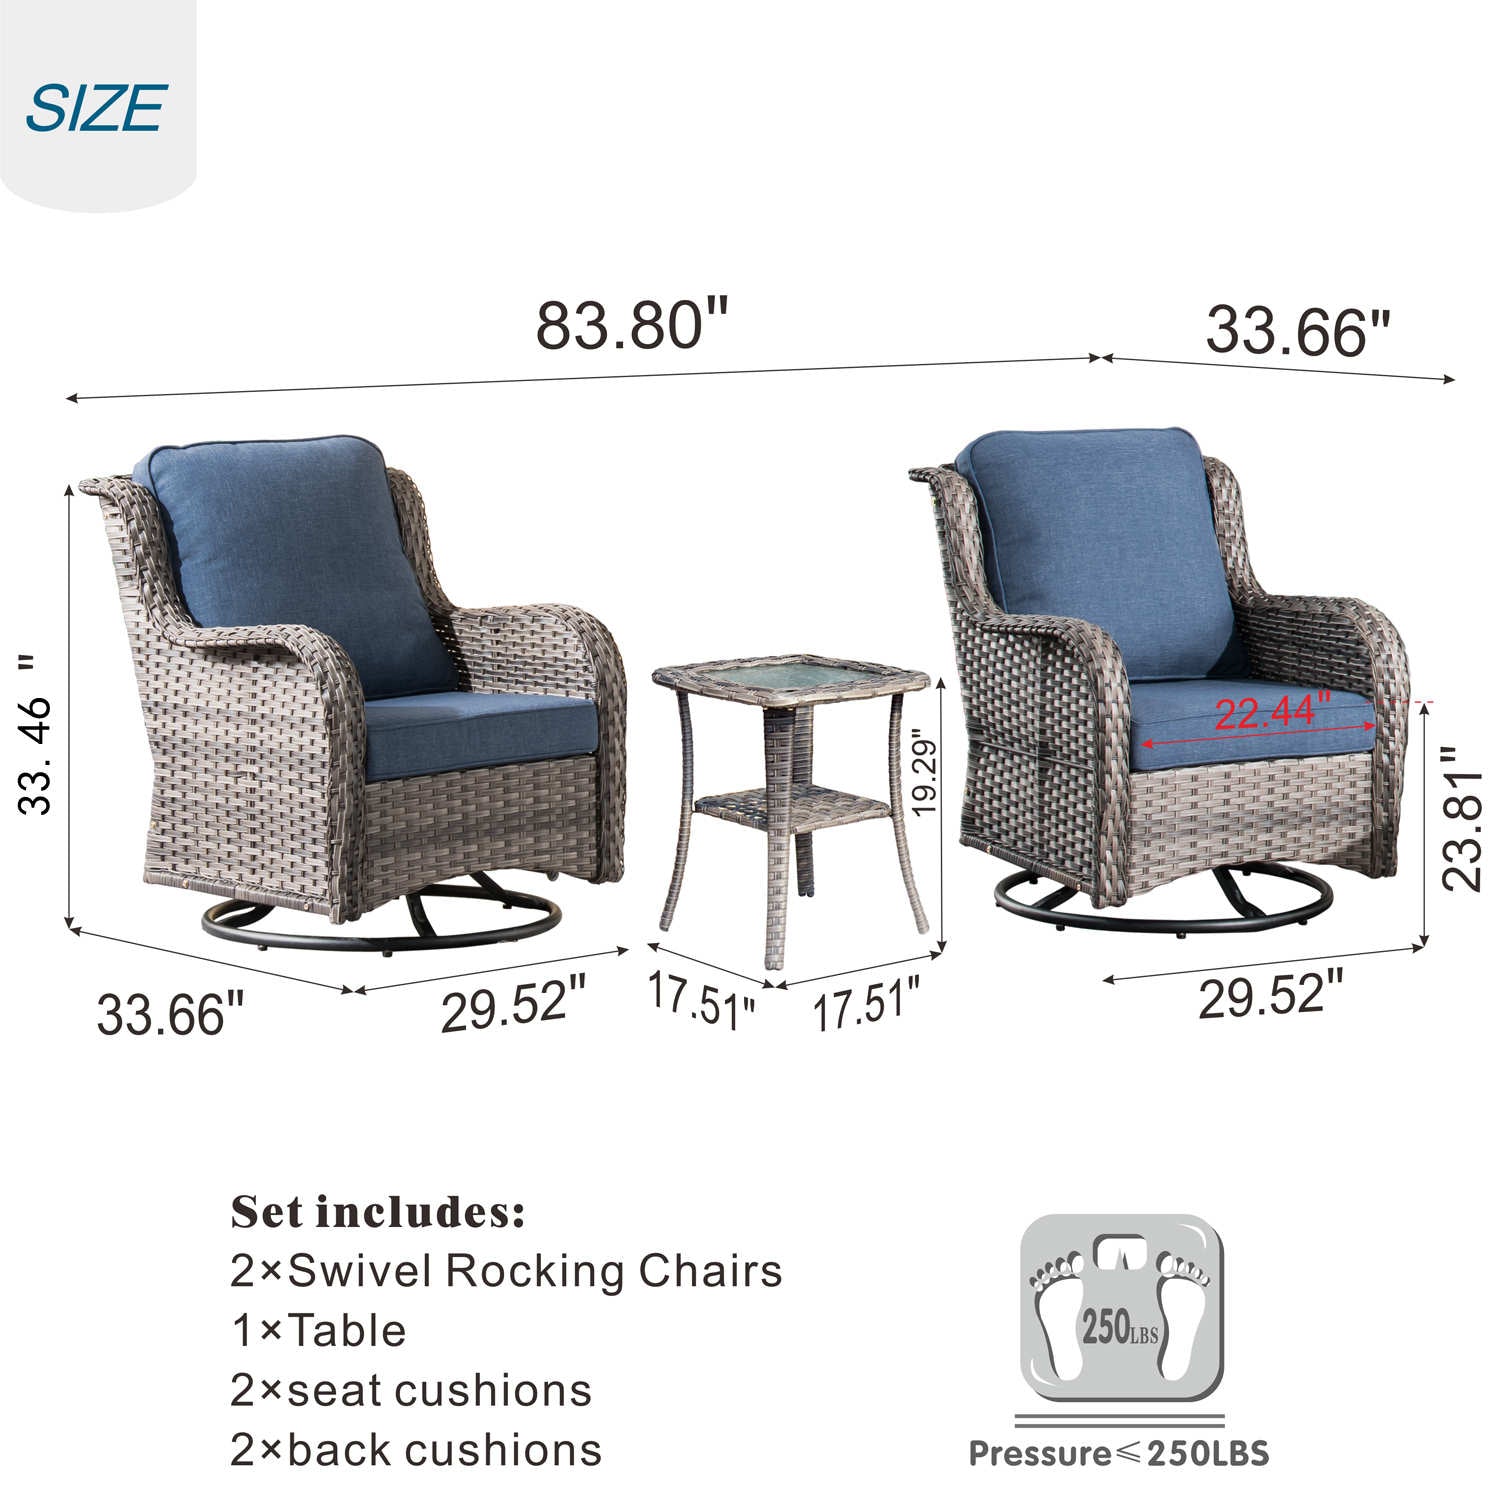 Ovios Patio Furniture Set 3-Piece with Swivel Chairs and Side Table Kenard